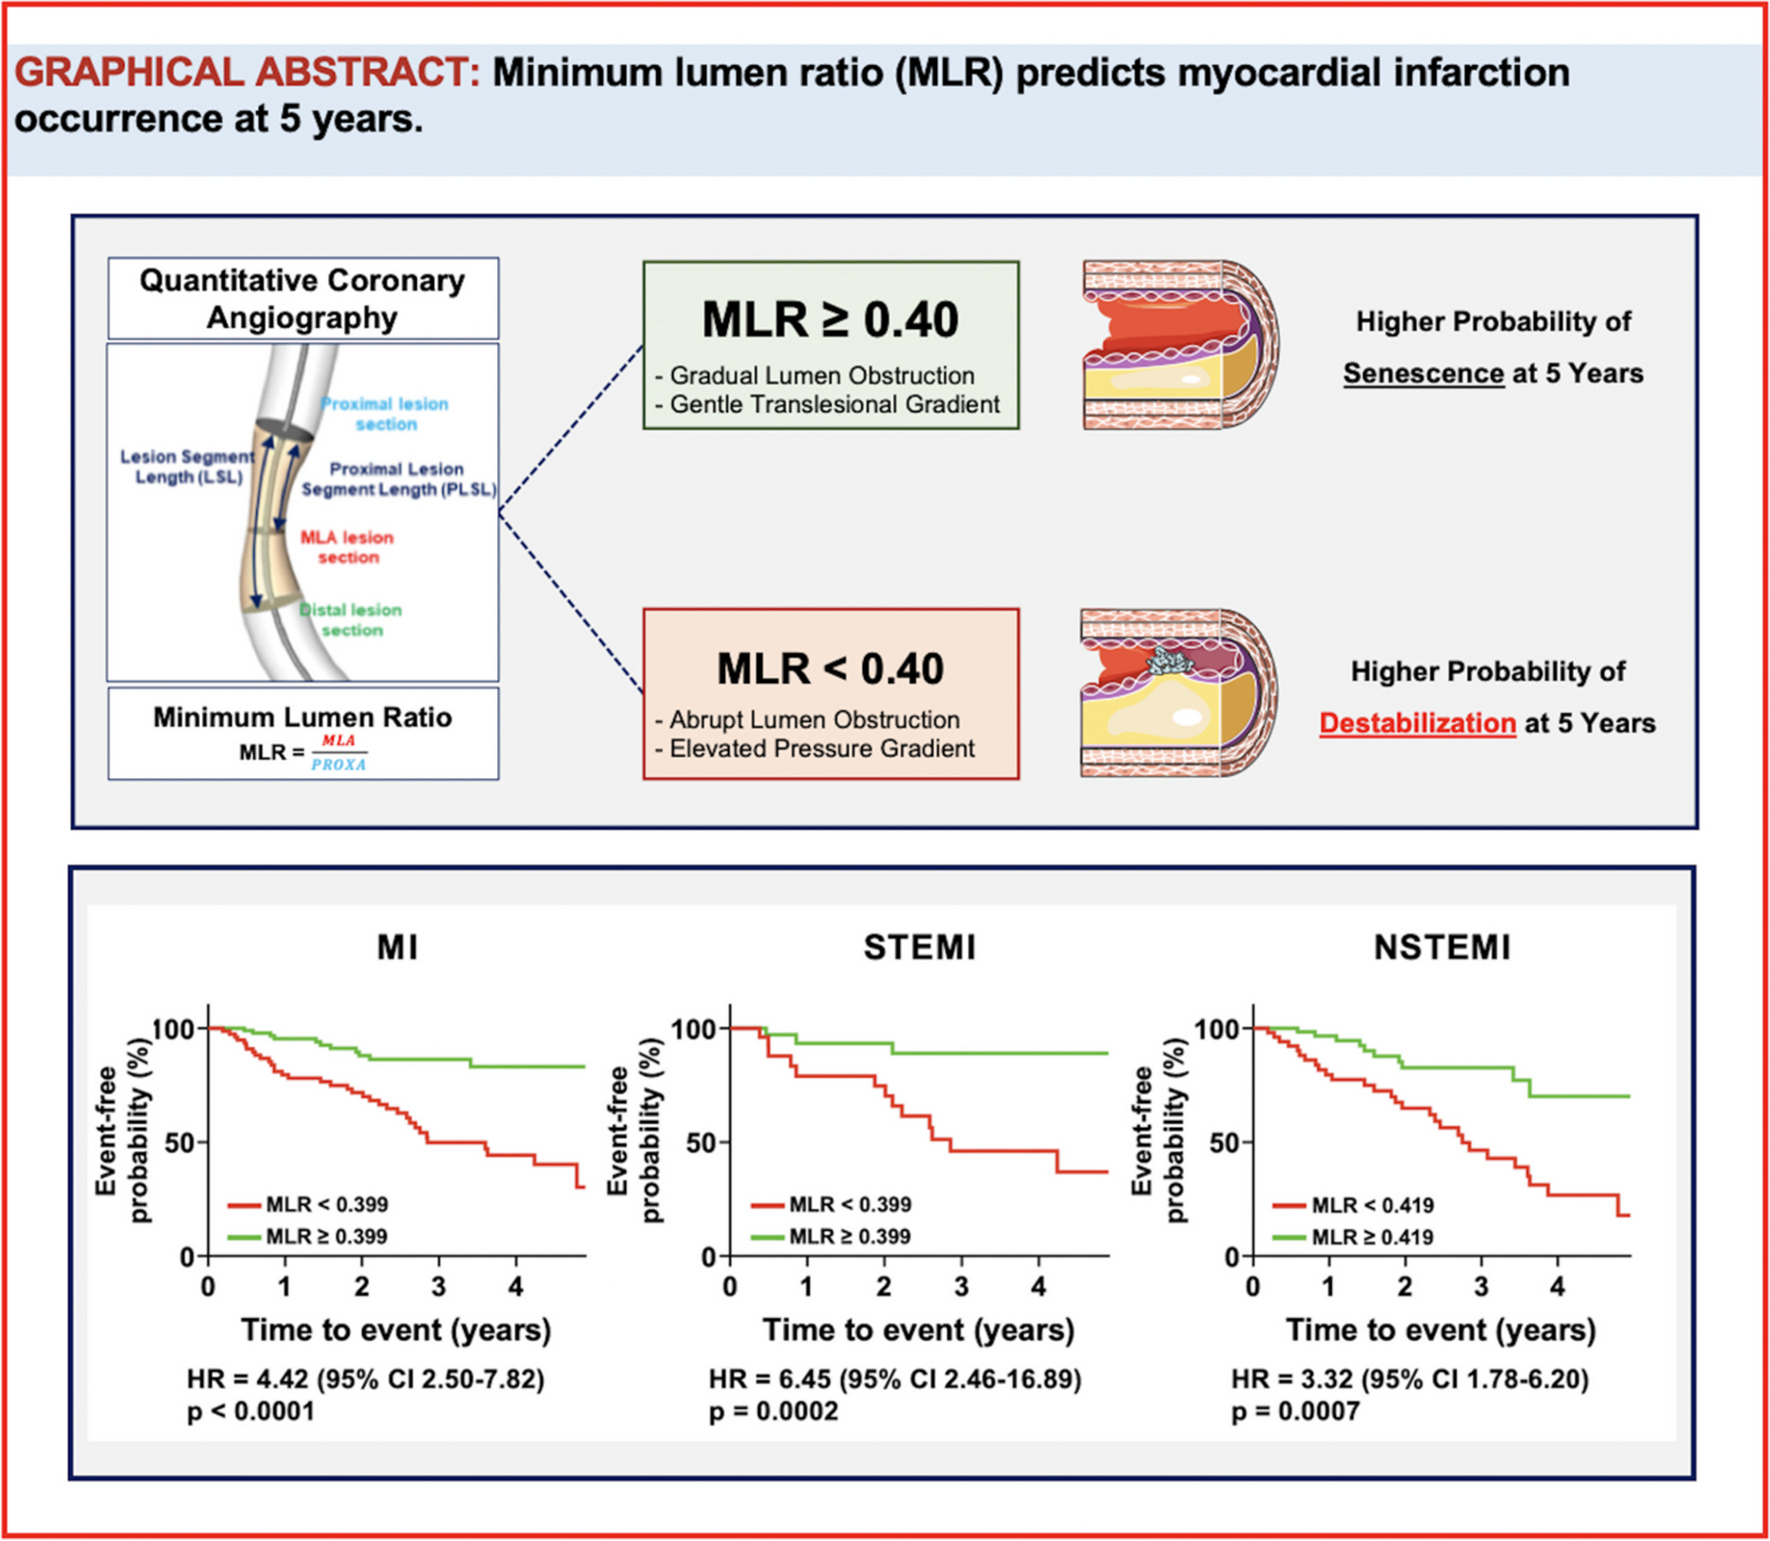 Association Between Automated 3D Measurement of Coronary Luminal Narrowing and Risk of Future Myocardial Infarction